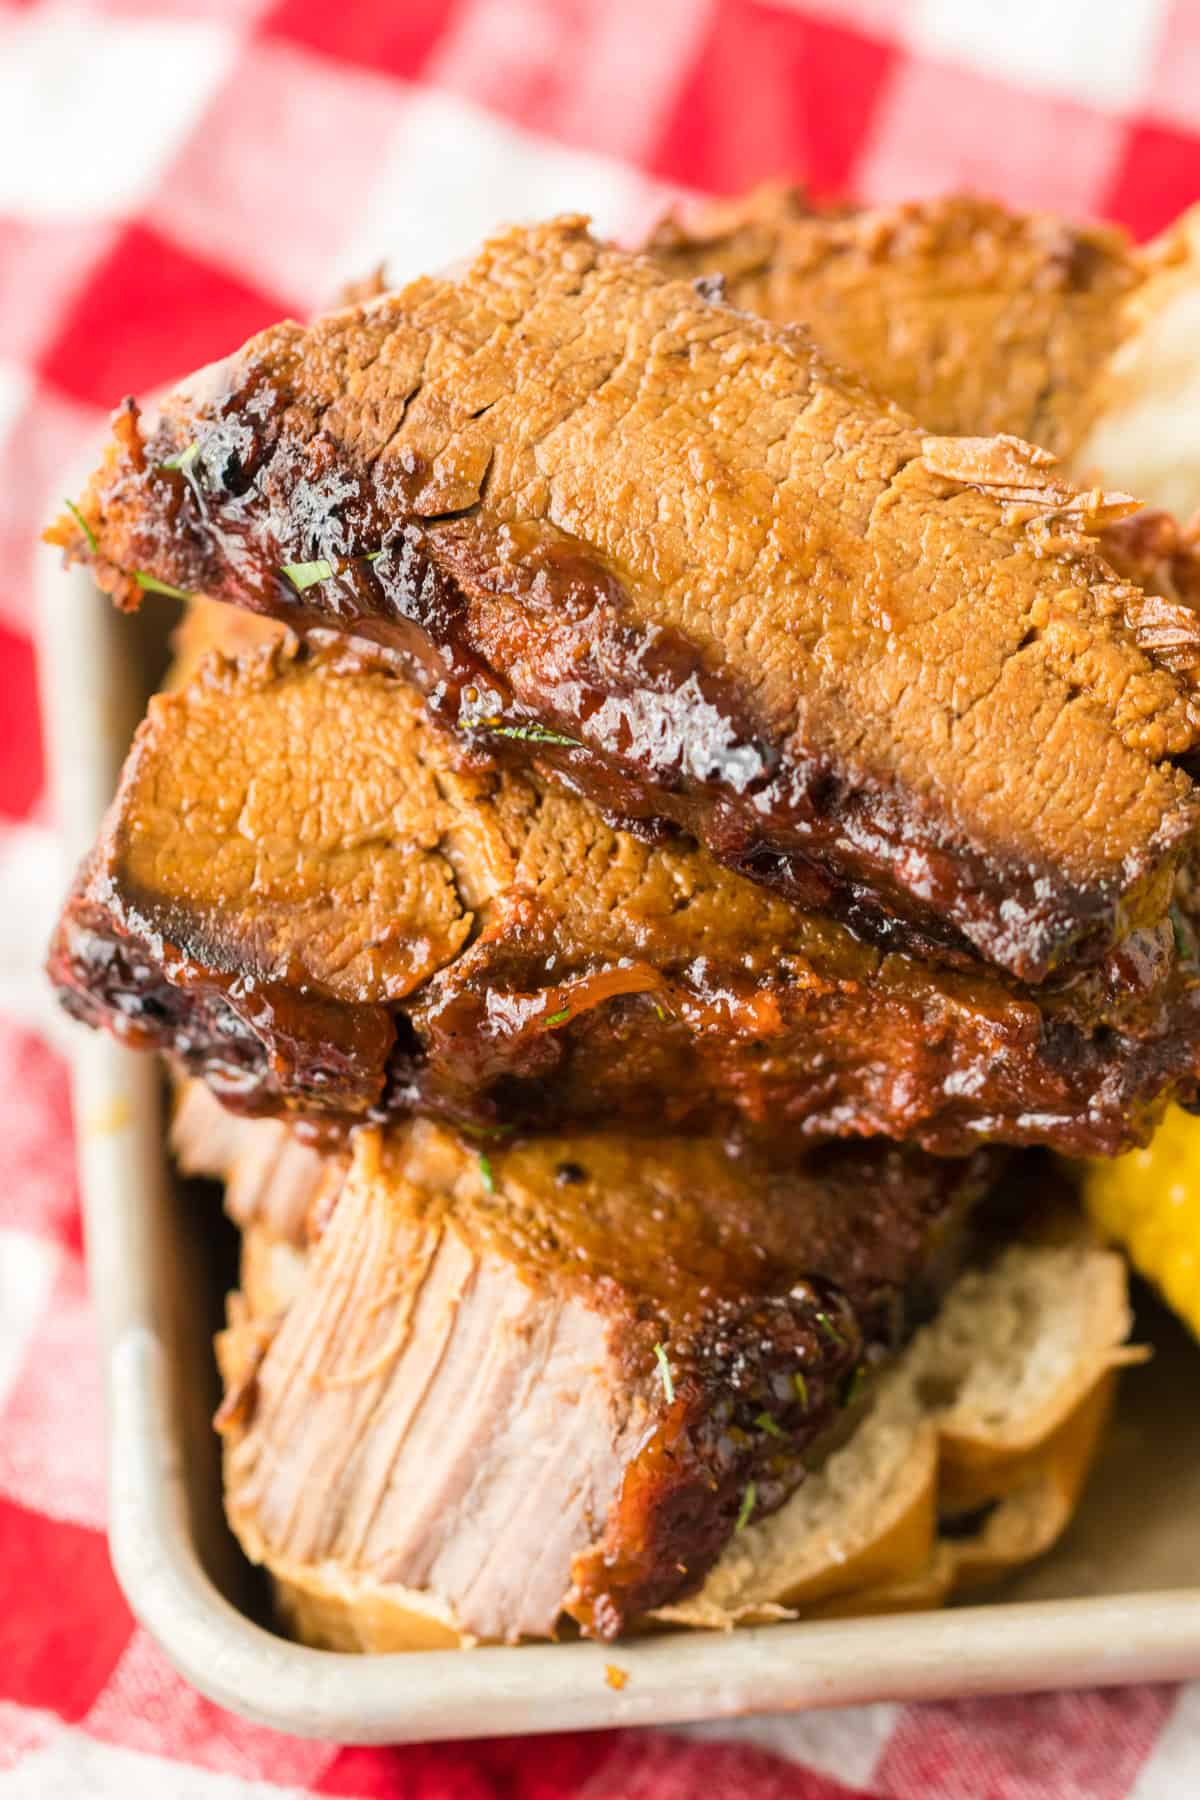 Slices of bbq slow cooked brisket served with corn and bread.